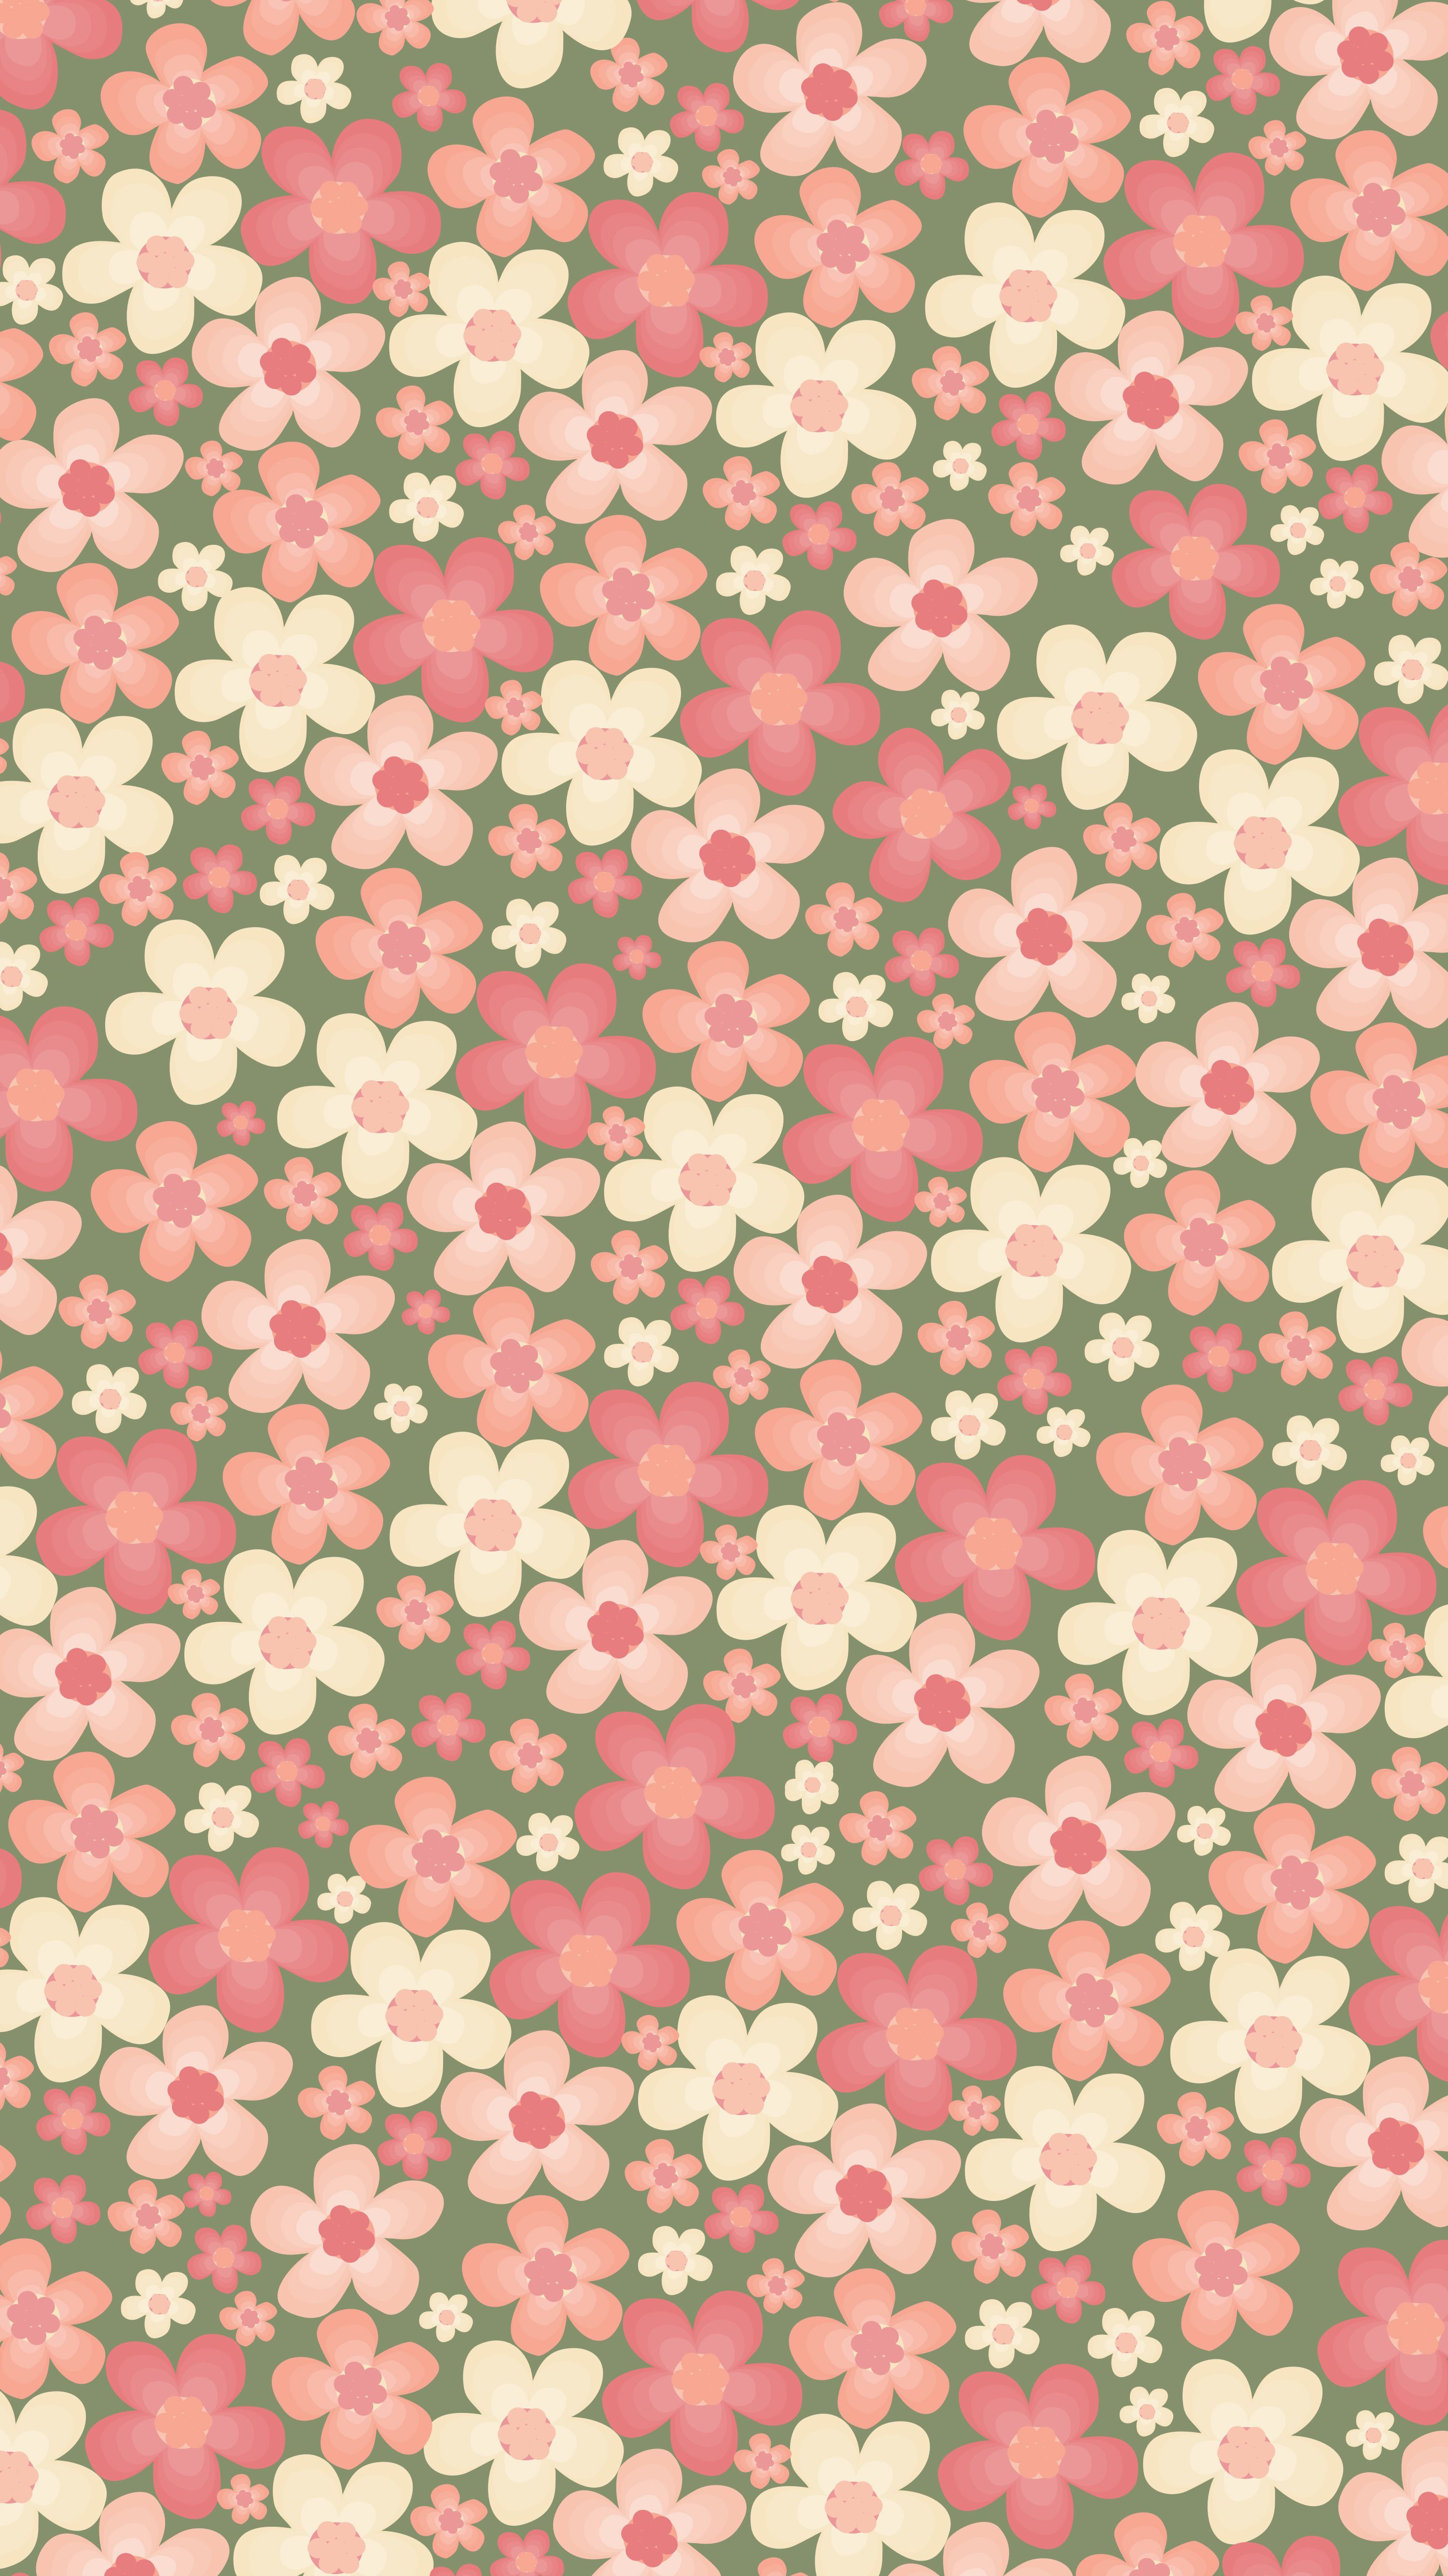 phone wallpaper pink and green floral design